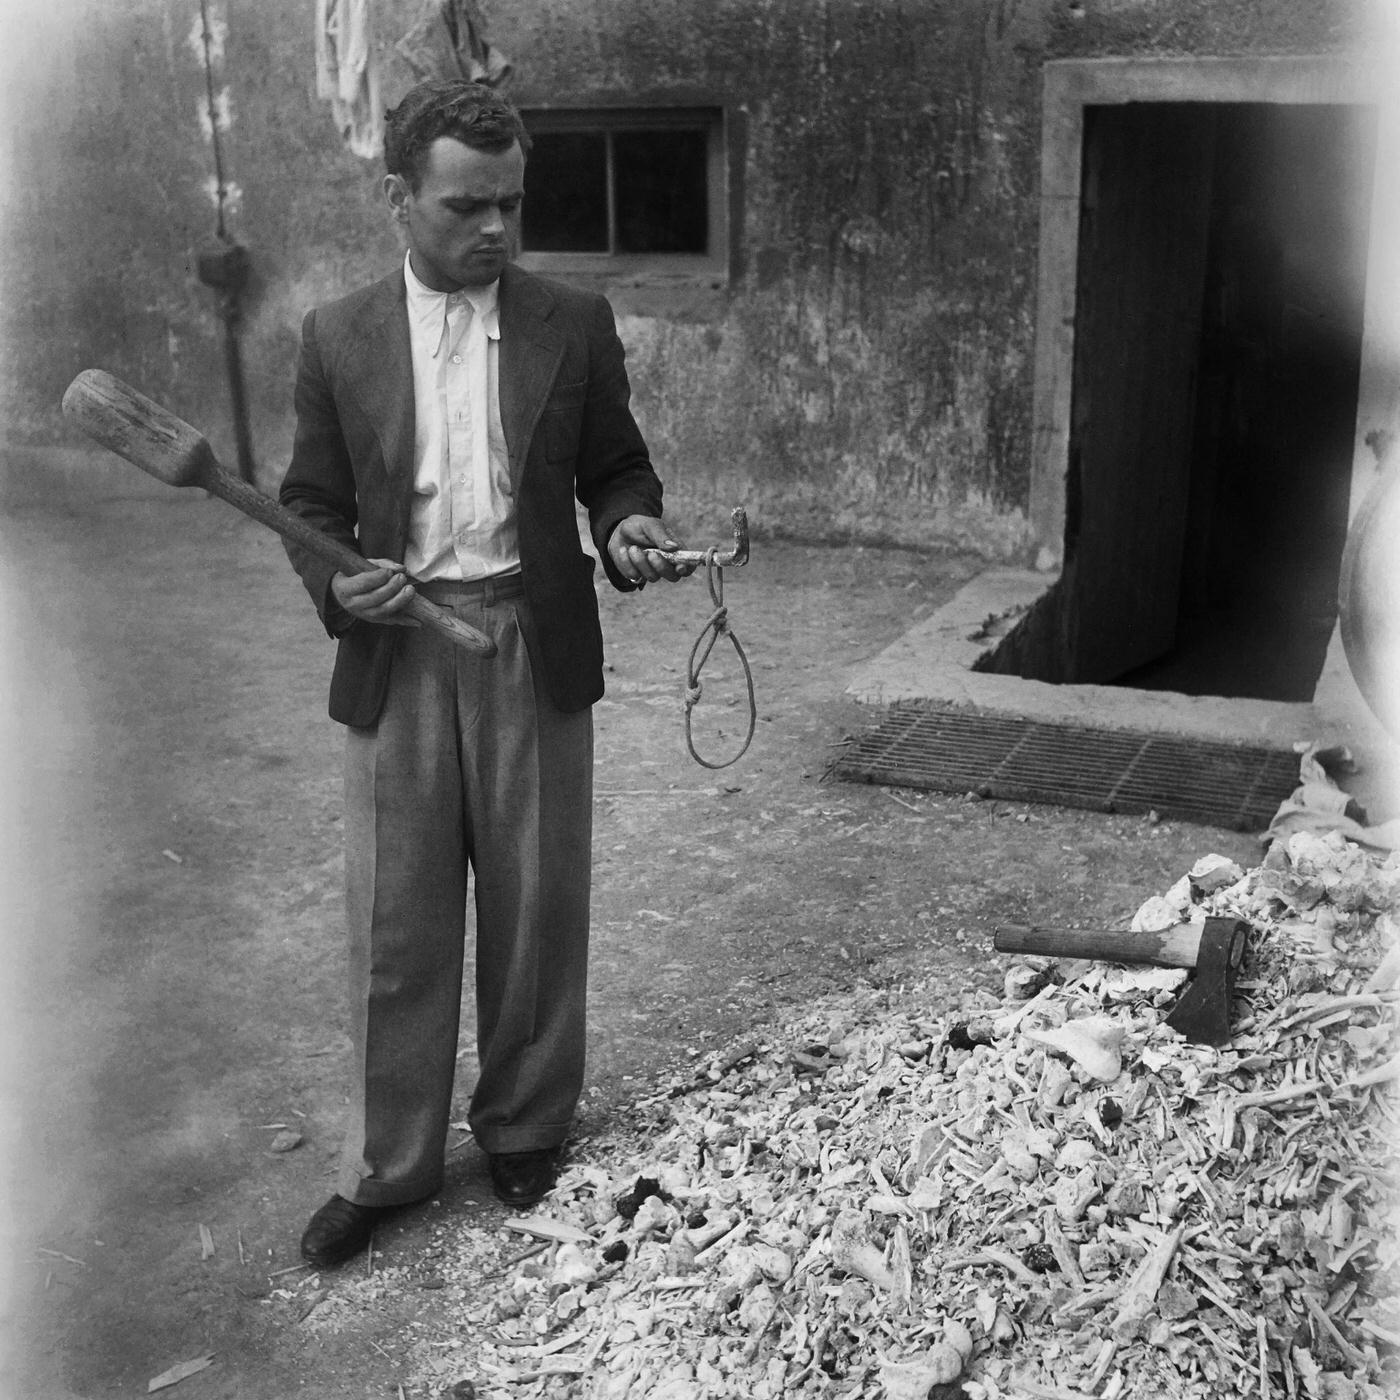 A man shows a noose used for hanging in Buchenwald concentration camp in April 1945.